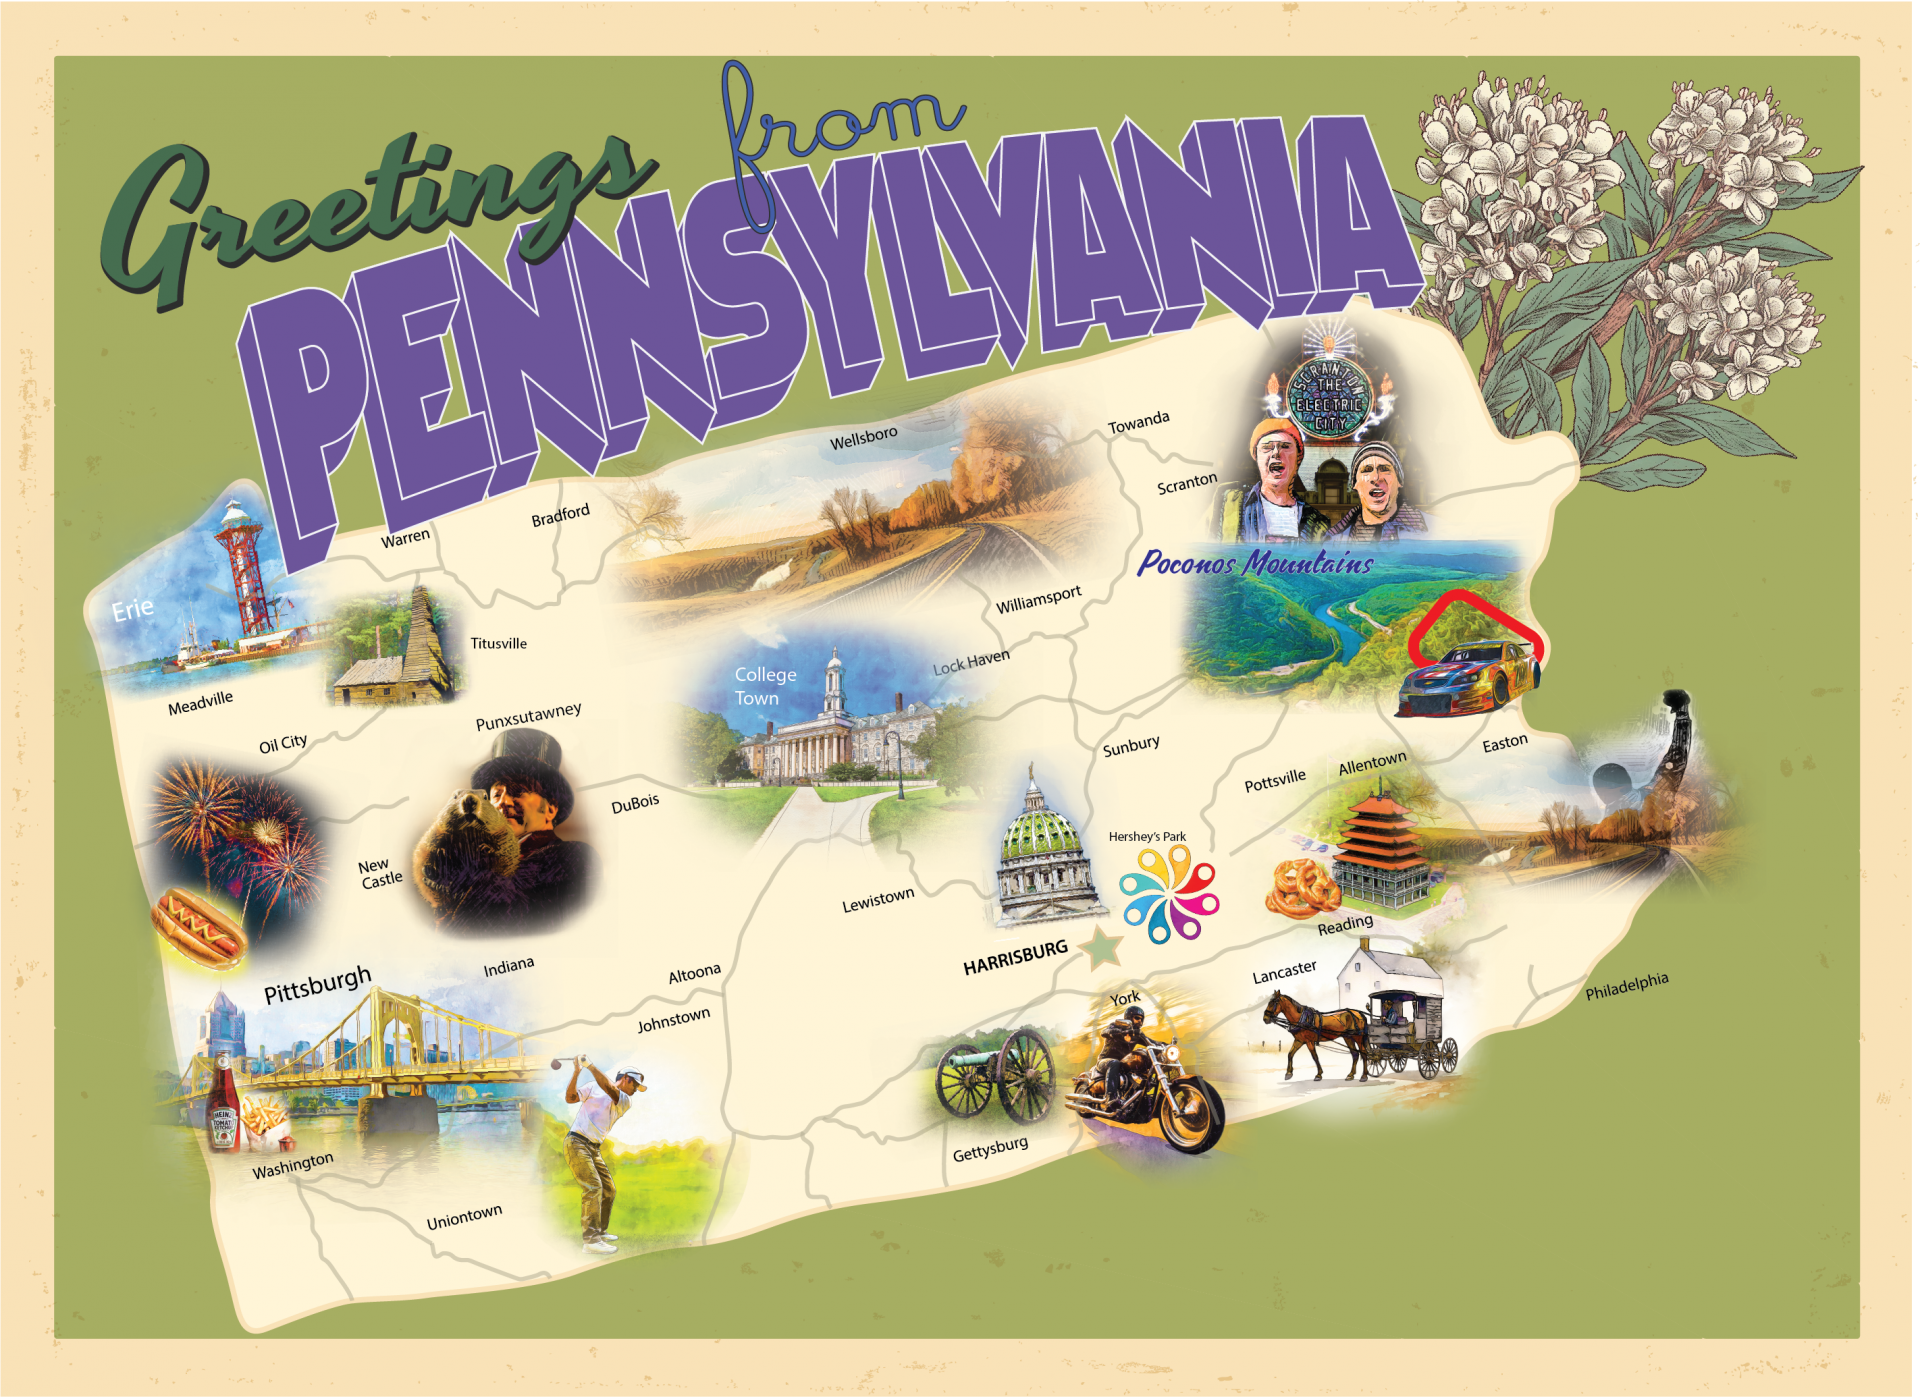 PA Postcard graphic with text "Greetings from Pennsylvania". Image of state with smaller attractions within